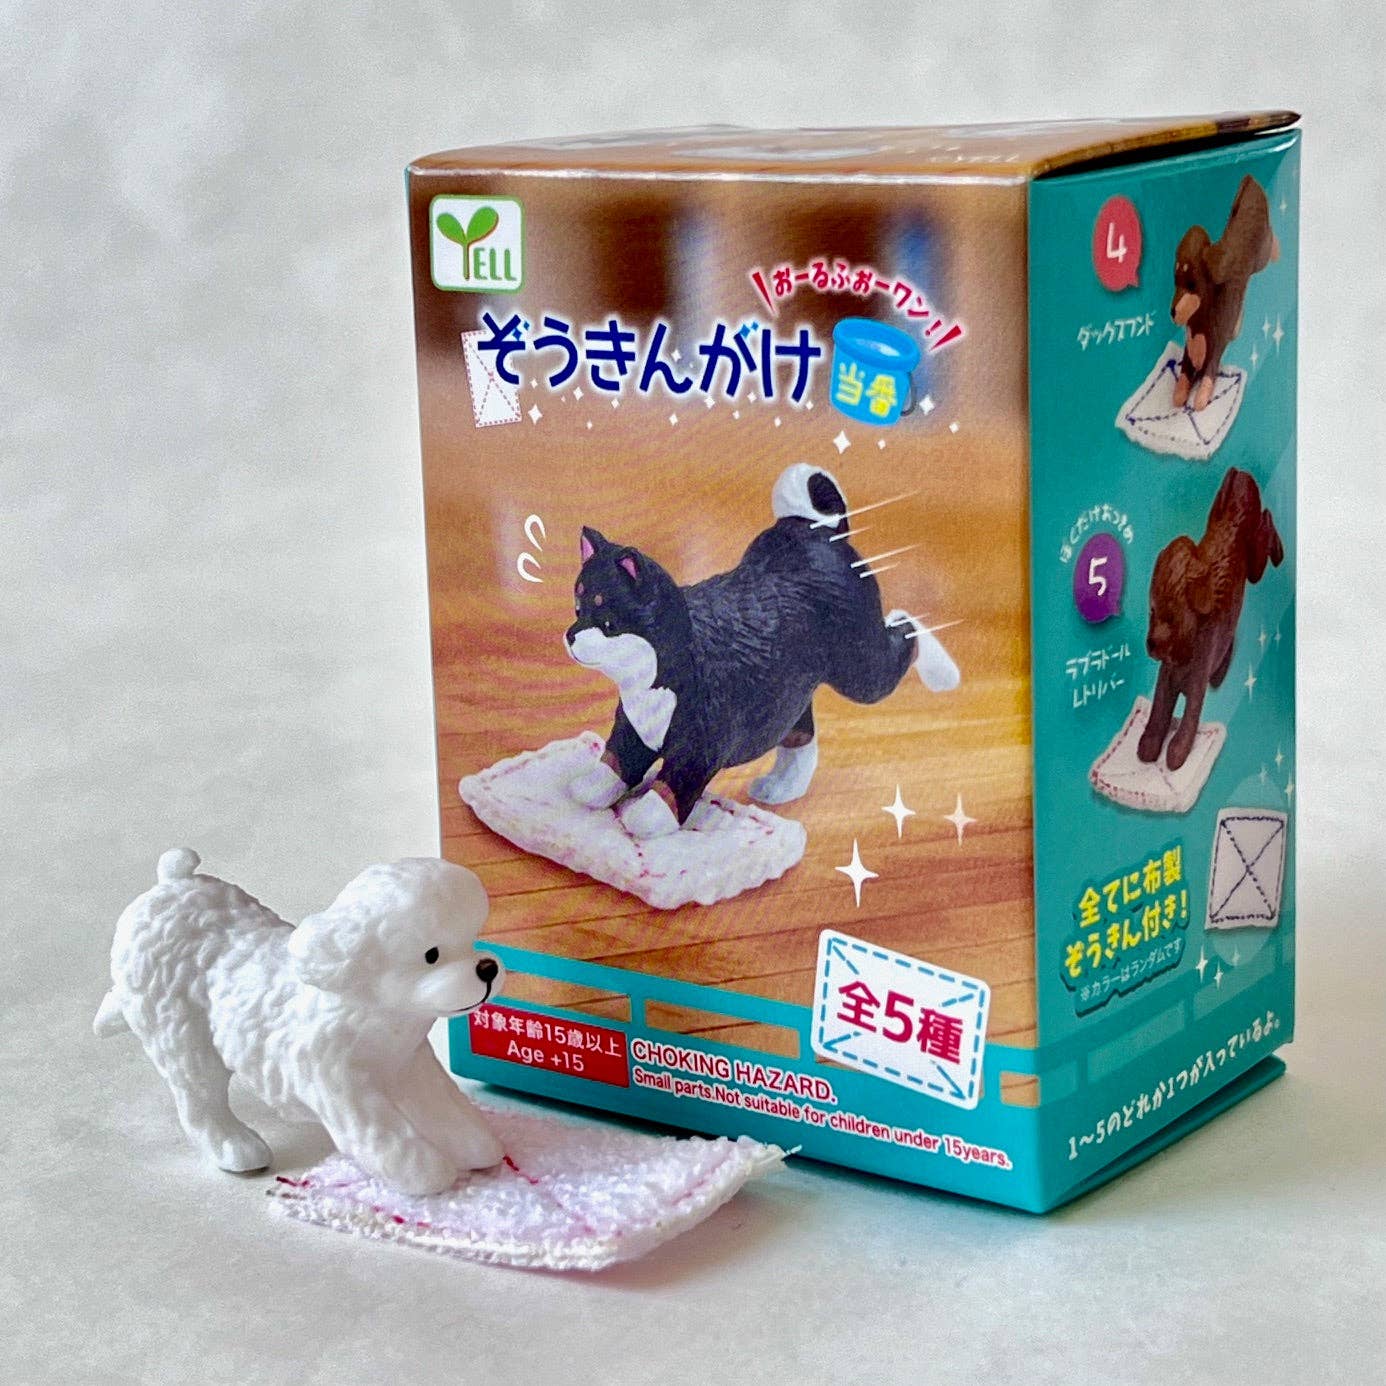 BCmini Cleaning Dogs Surprise Box Kawaii Gifts 4570198770109